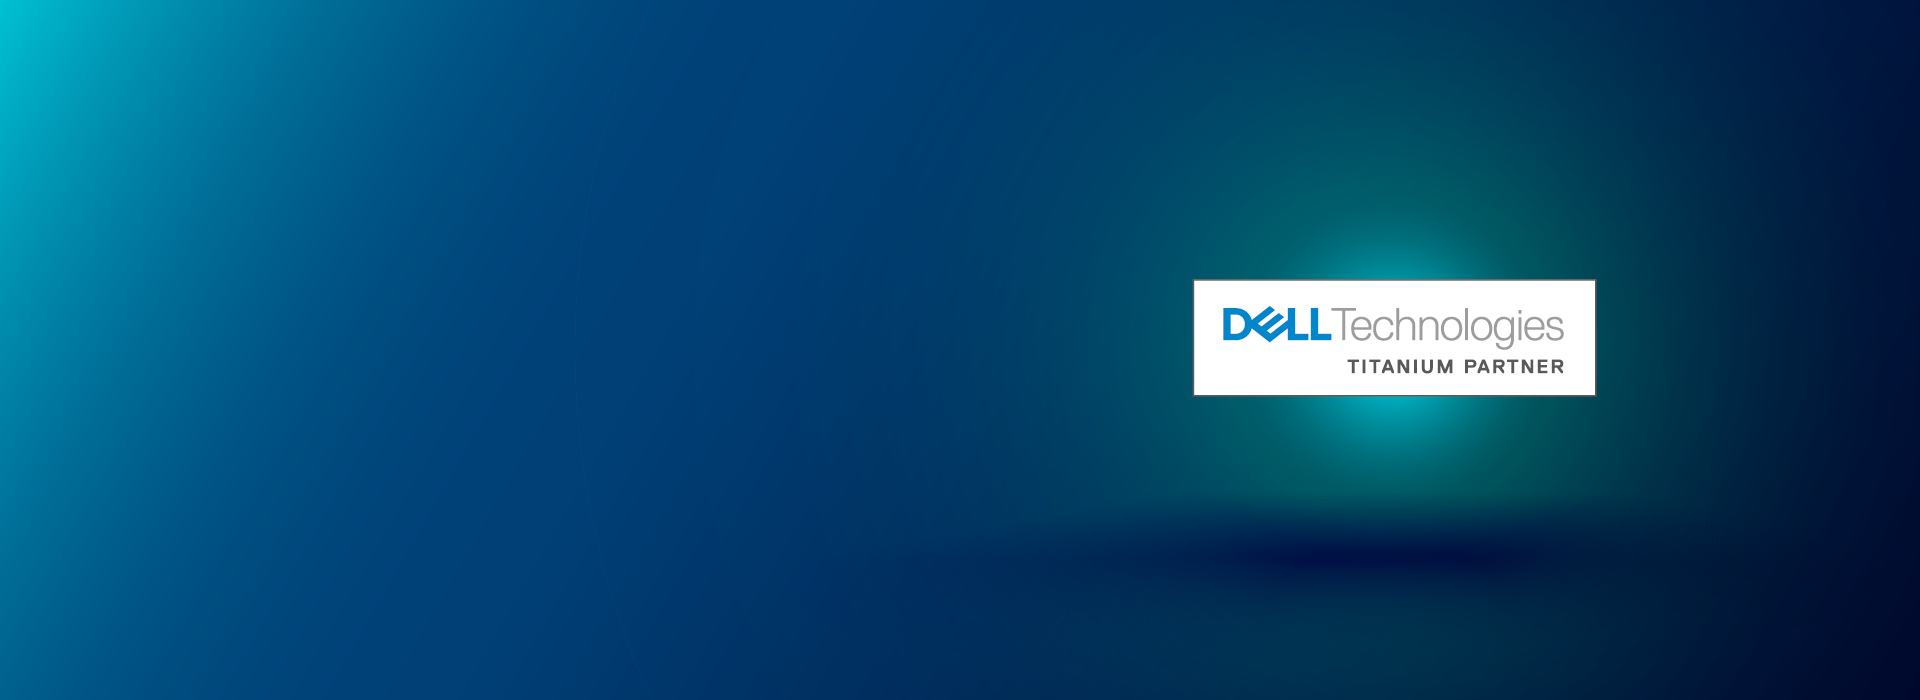 Phoenix named Dell Technologies UK Public Sector Partner of the Year 2022